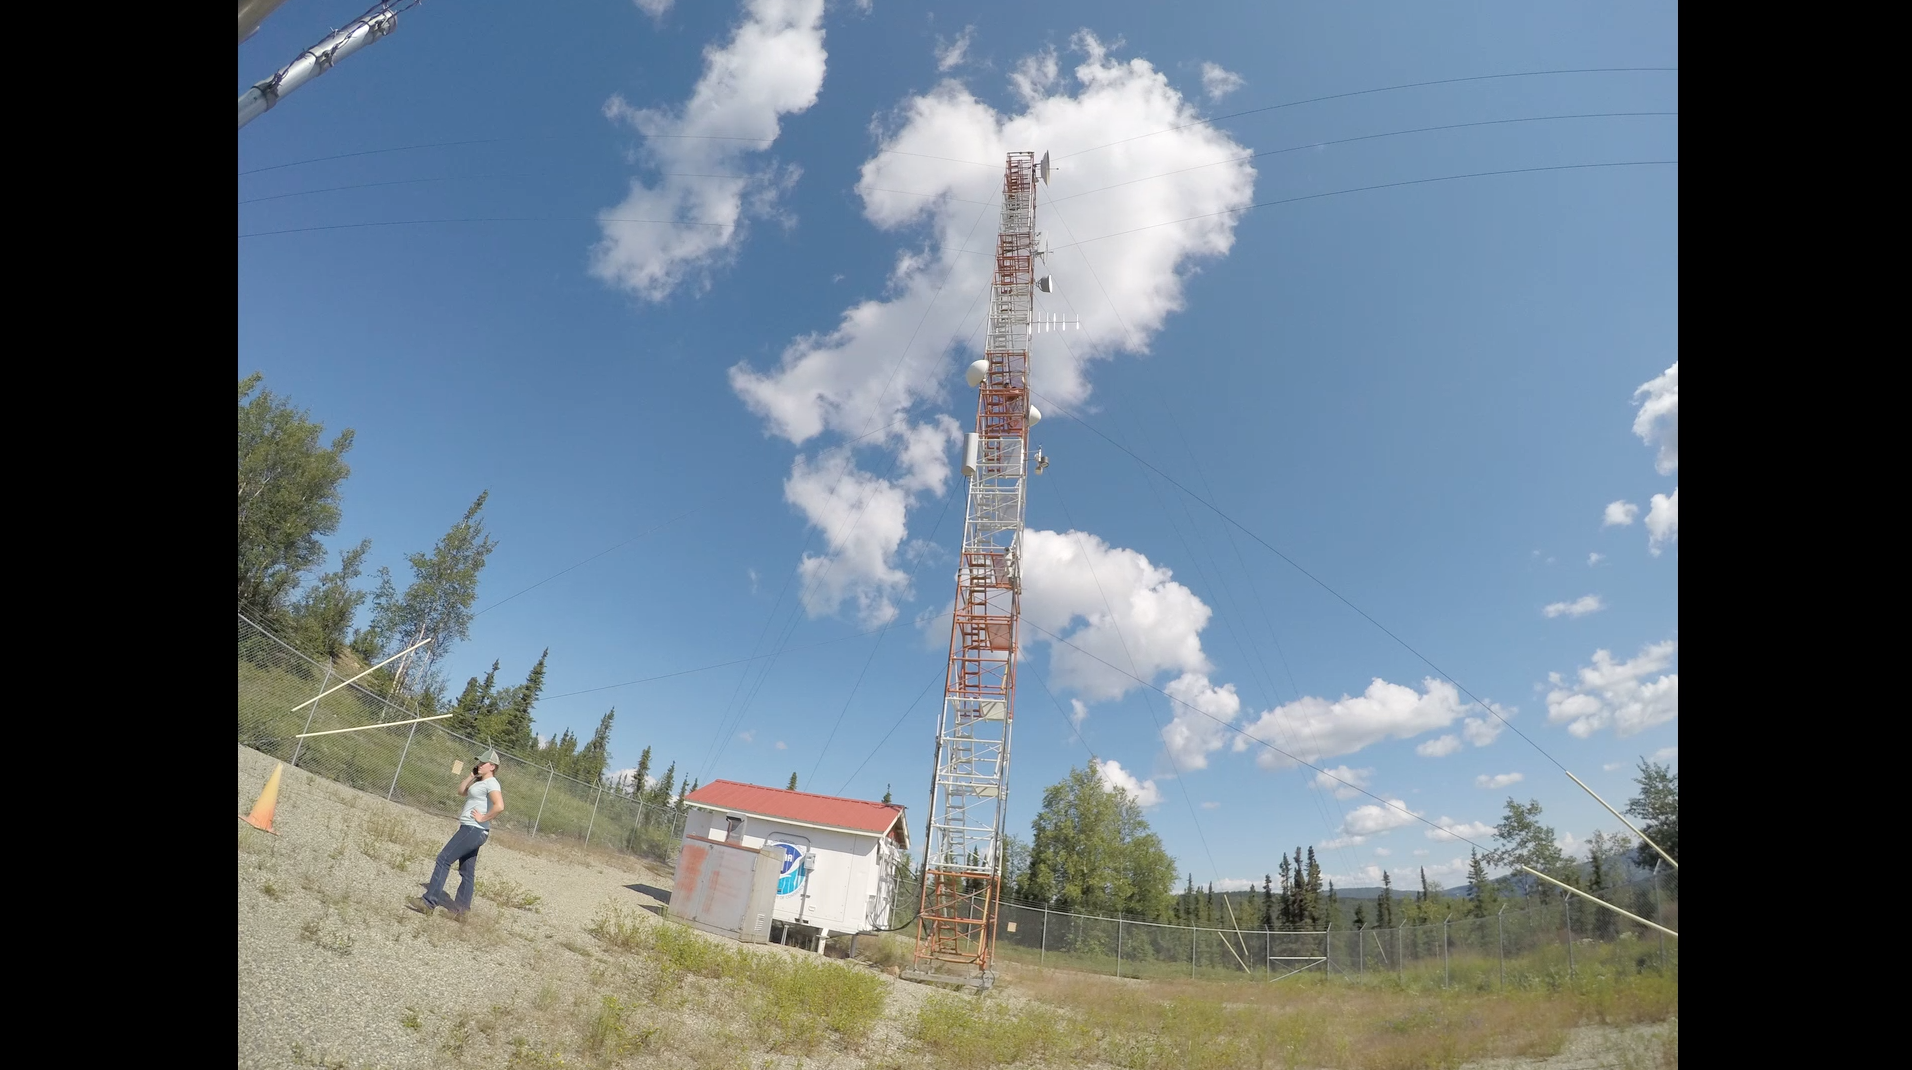 A timelapse of a CARVE tower near Fairbanks, Alaska, as researchers and communicators climb and observe the structure.